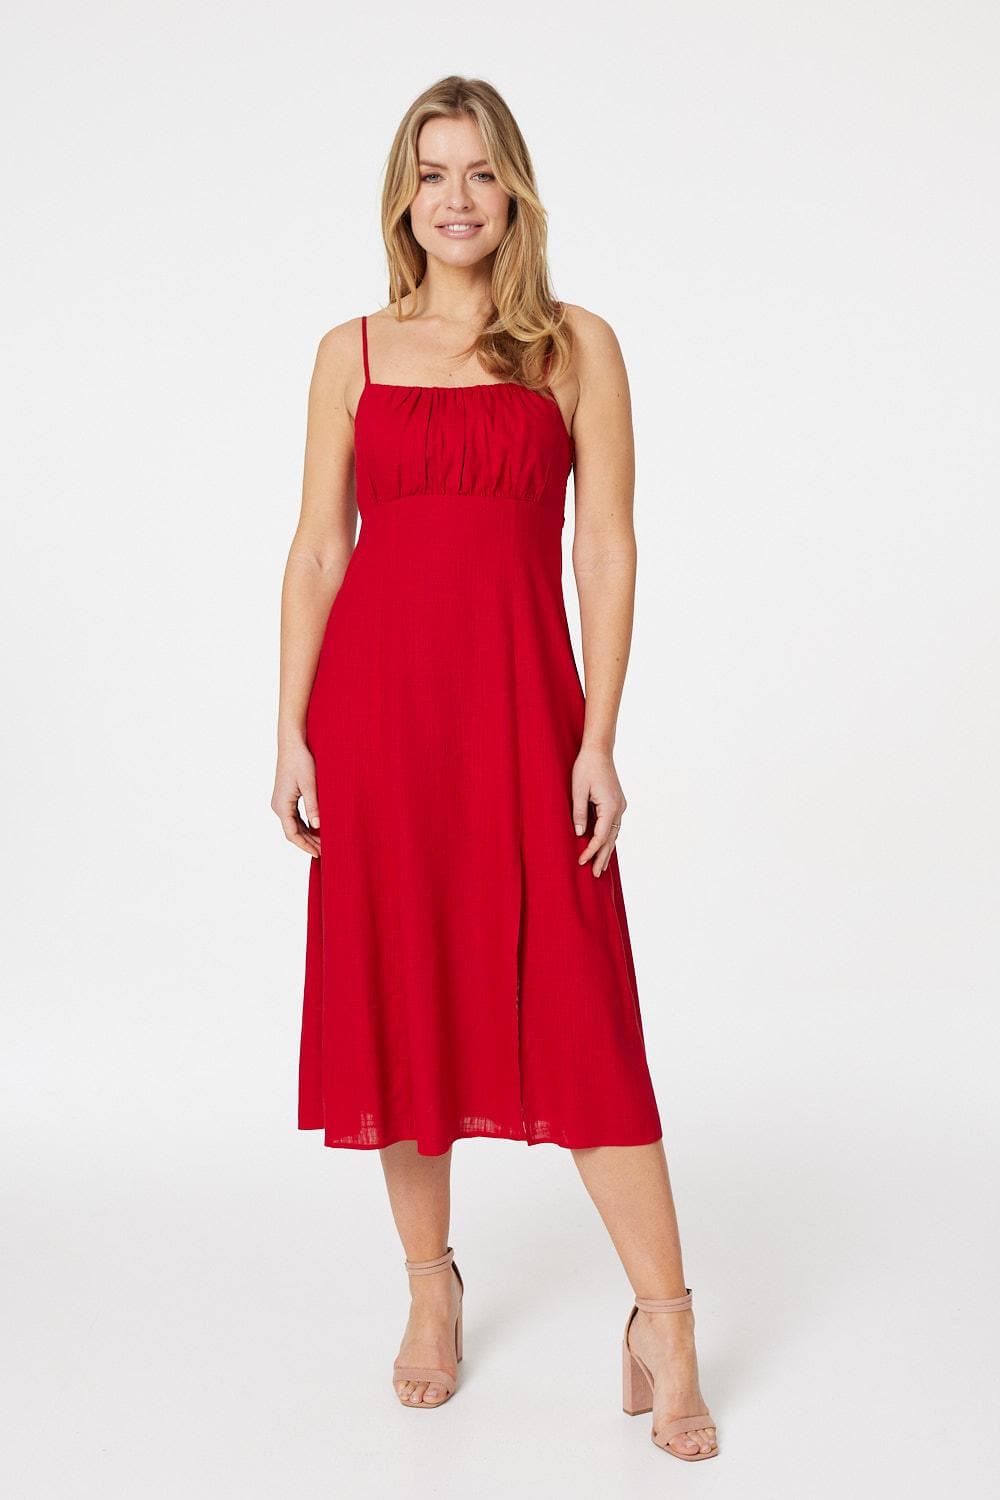 Red | Linen Ruched Front Midi Dress : Model is 5'10"/178 cm and wears UK8/EU36/US4/AUS8